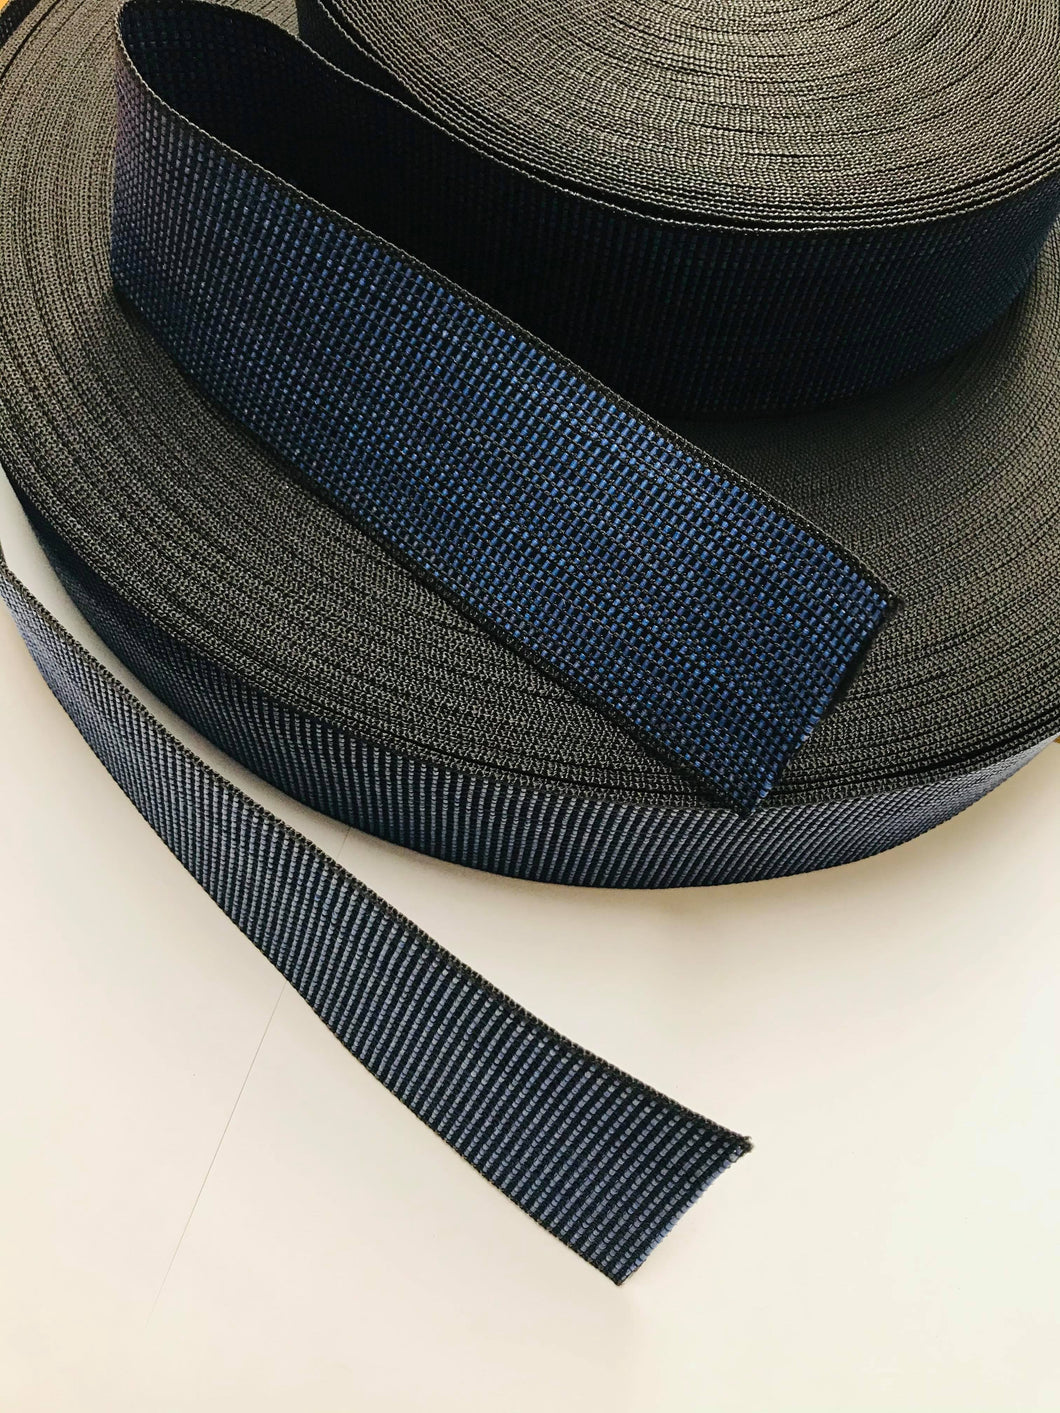 Elasticated seat webbing for sofa and chairs repairs.  Top quality Webbing Great for upholstery & crafts etc Versatile - can be used with webbing clips or secured by stapling or tacks Various sizes available from 1 Metre to 100m Trade Roll.    30% Stretch / 50mm Width.